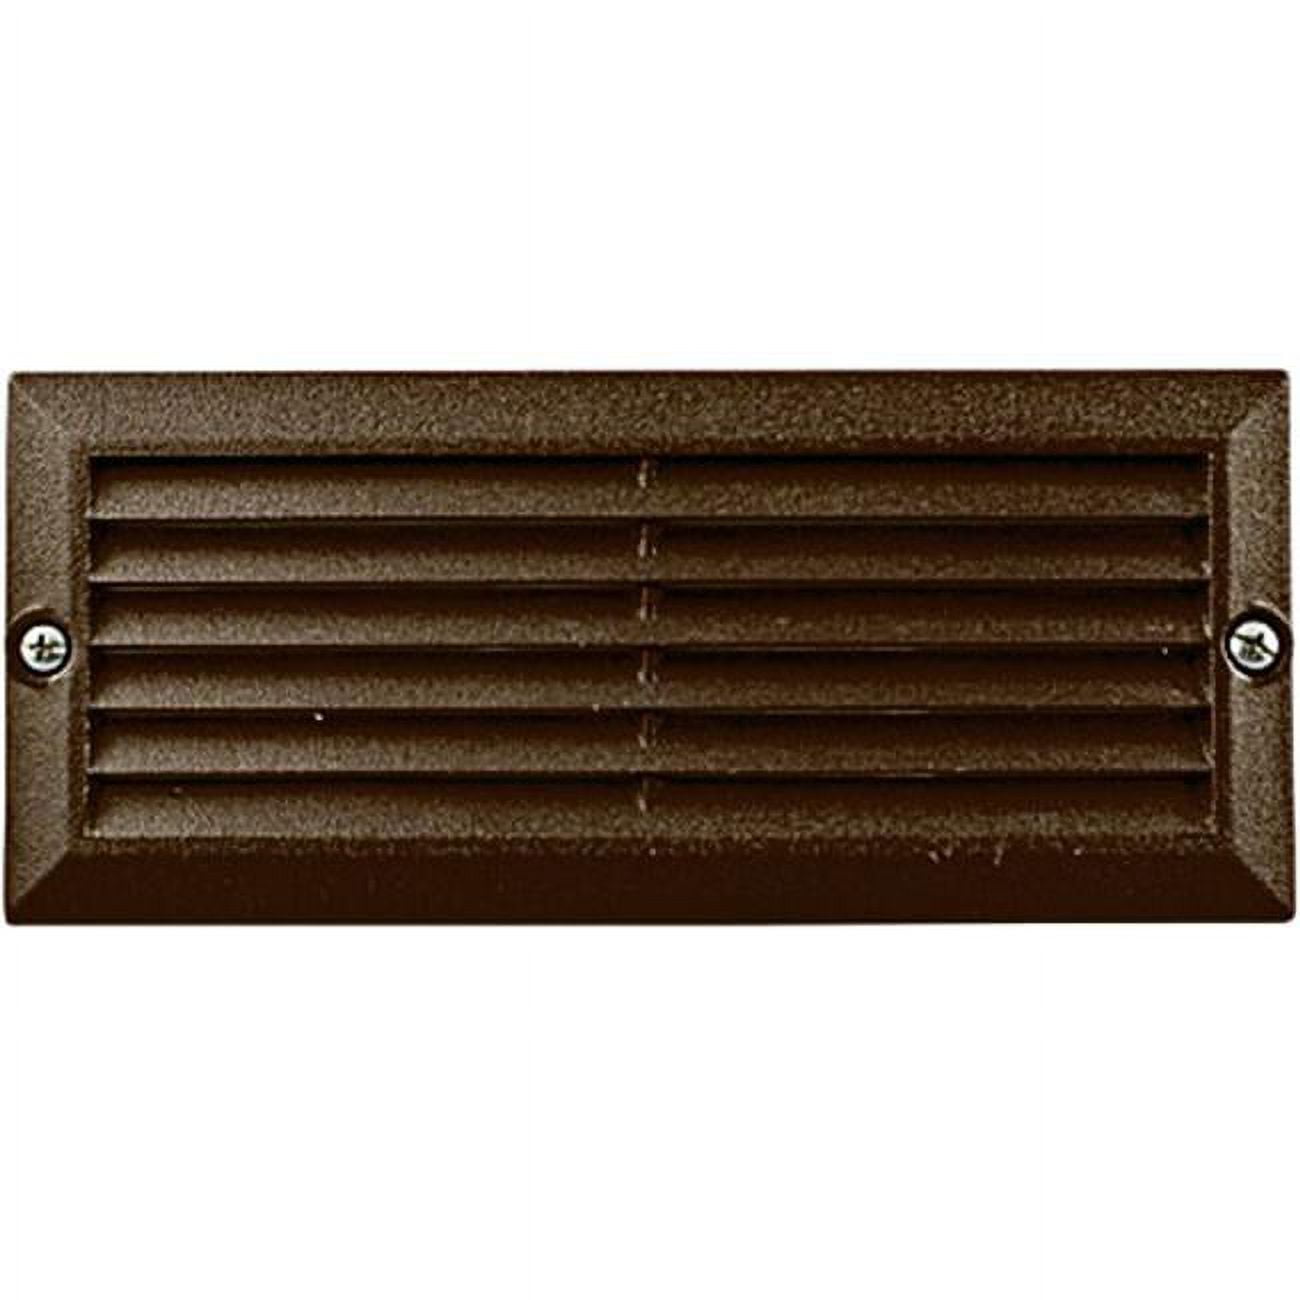 Picture of Dabmar Lighting LV600-BZ Cast Aluminum Recessed Louvered Brick, Step & Wall Light, Bronze - 3.97 x 9.13 x 3.25 in.